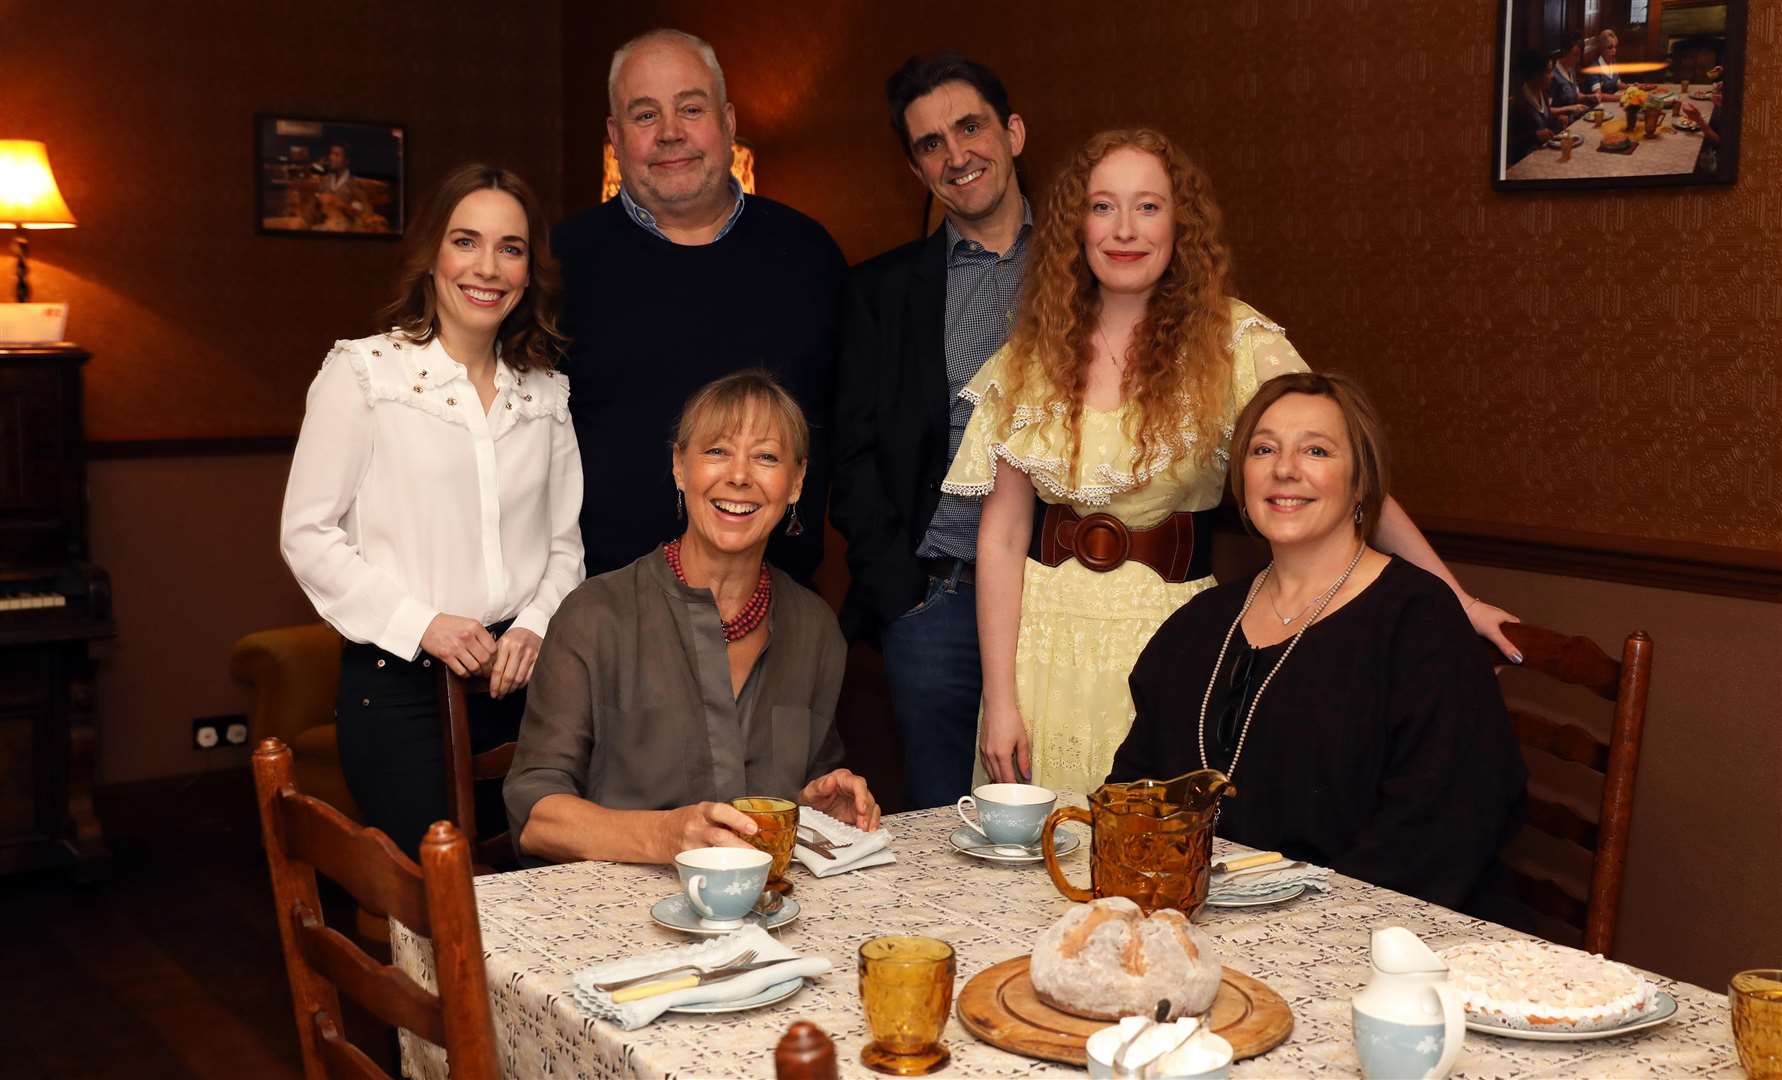 The Call the Midwife cast at the Nonnatus House dining table at the dockyard in Chatham Picture: Daniel Turner